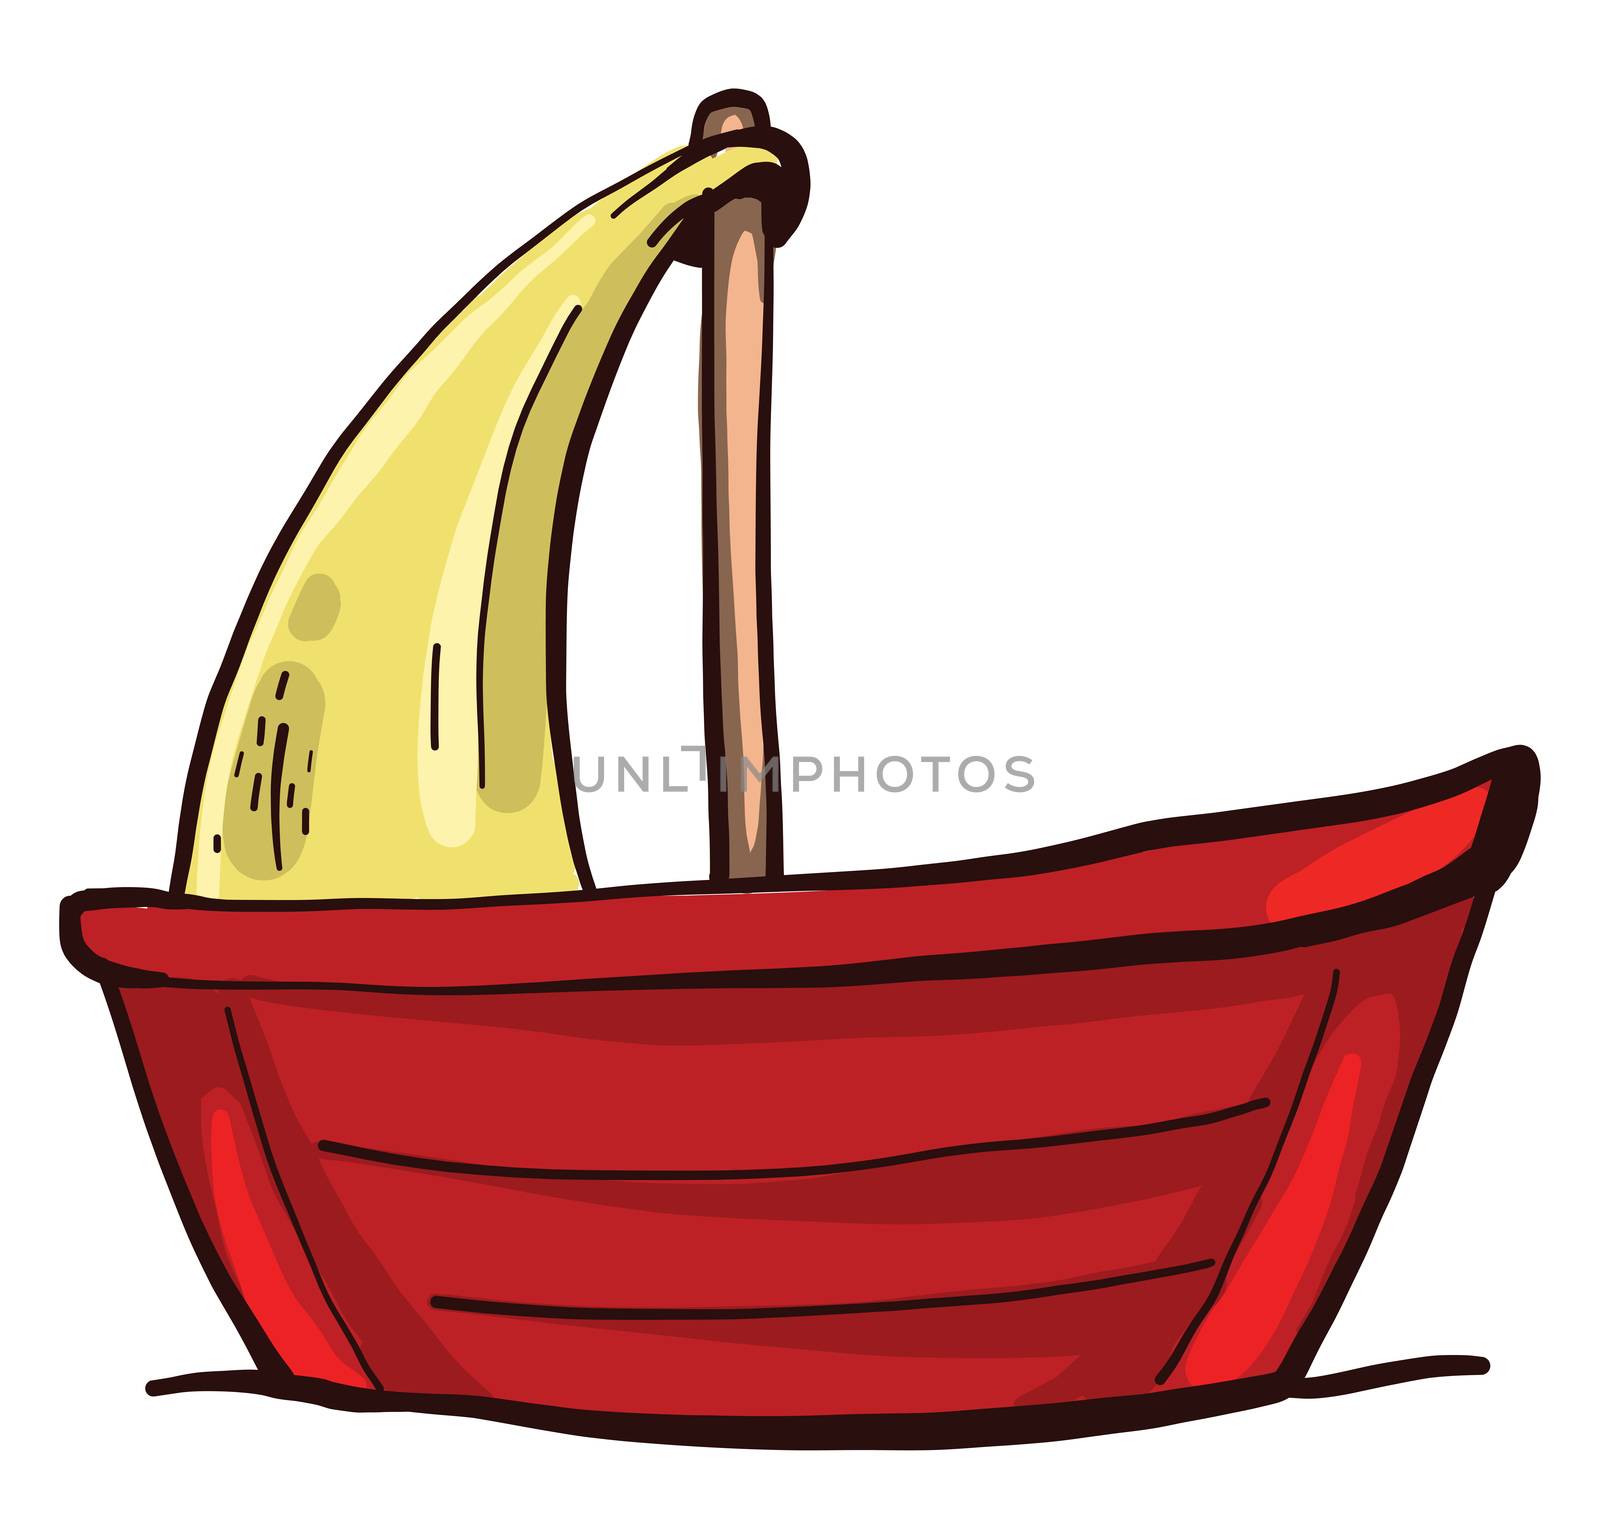 Red small boat , illustration, vector on white background by Morphart